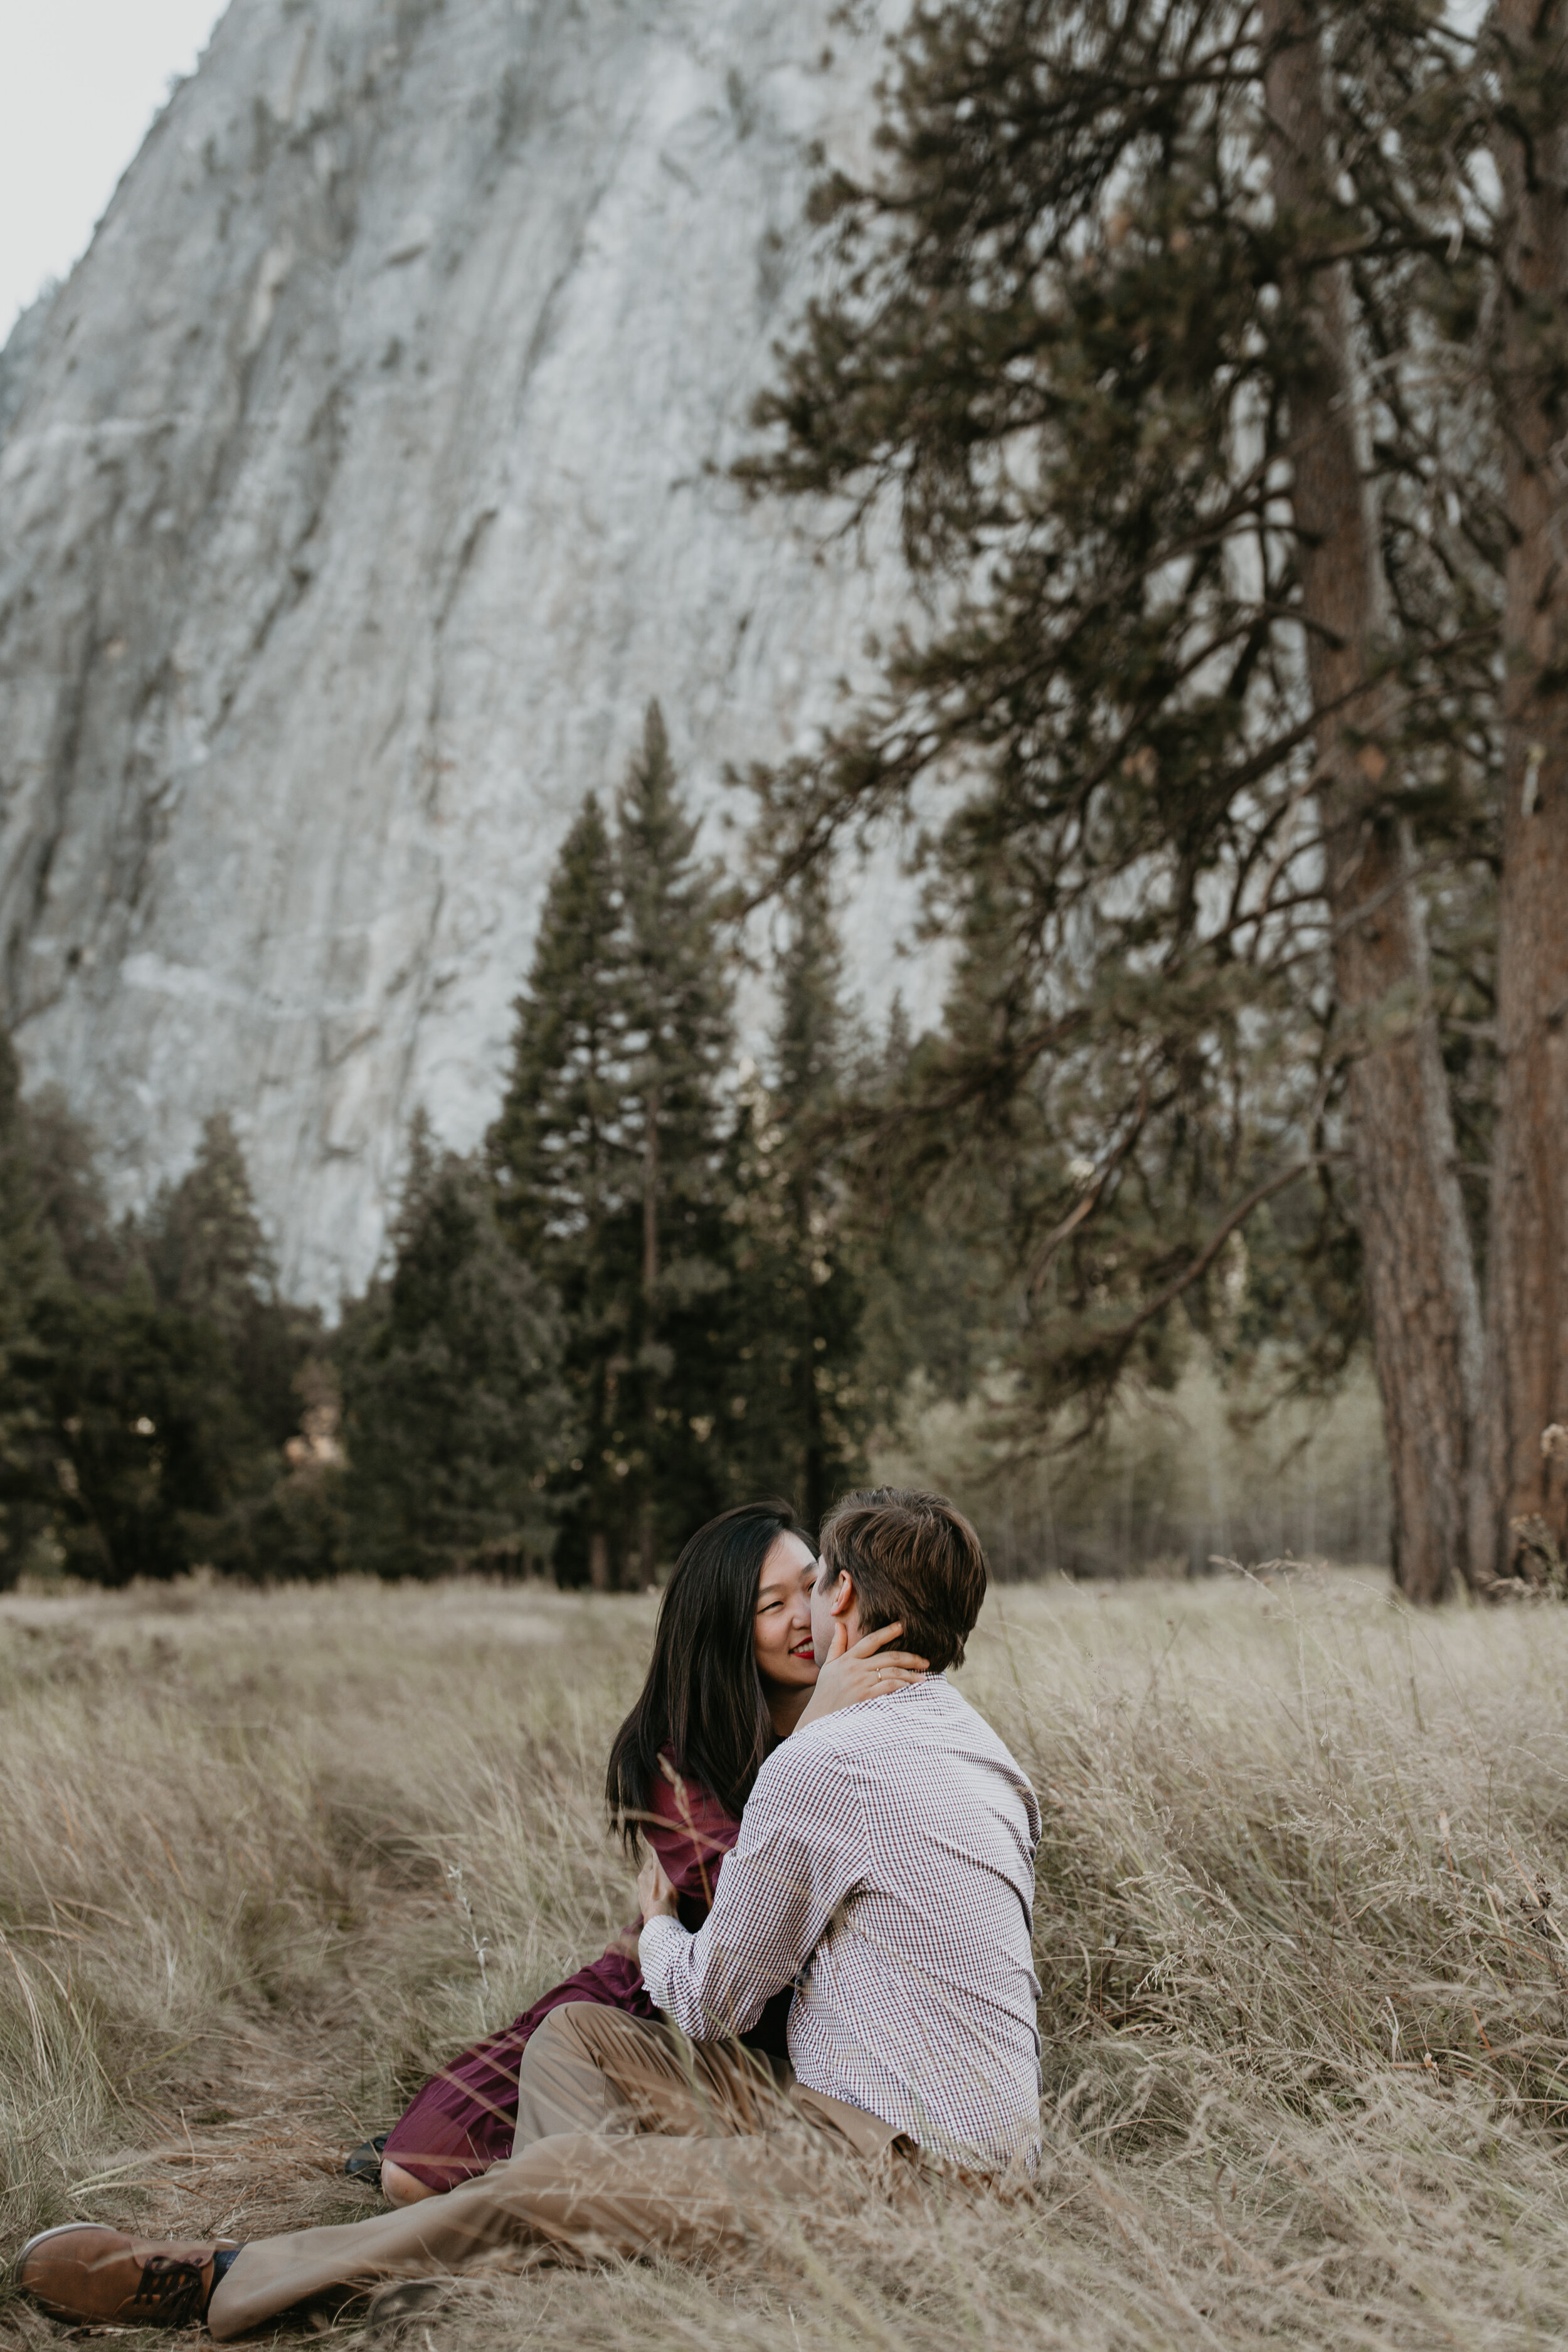 yosemite-national-park-couples-session-at-taft-point-and-yosemite-valley-yosemite-elopement-photographer-nicole-daacke-photography-109.jpg